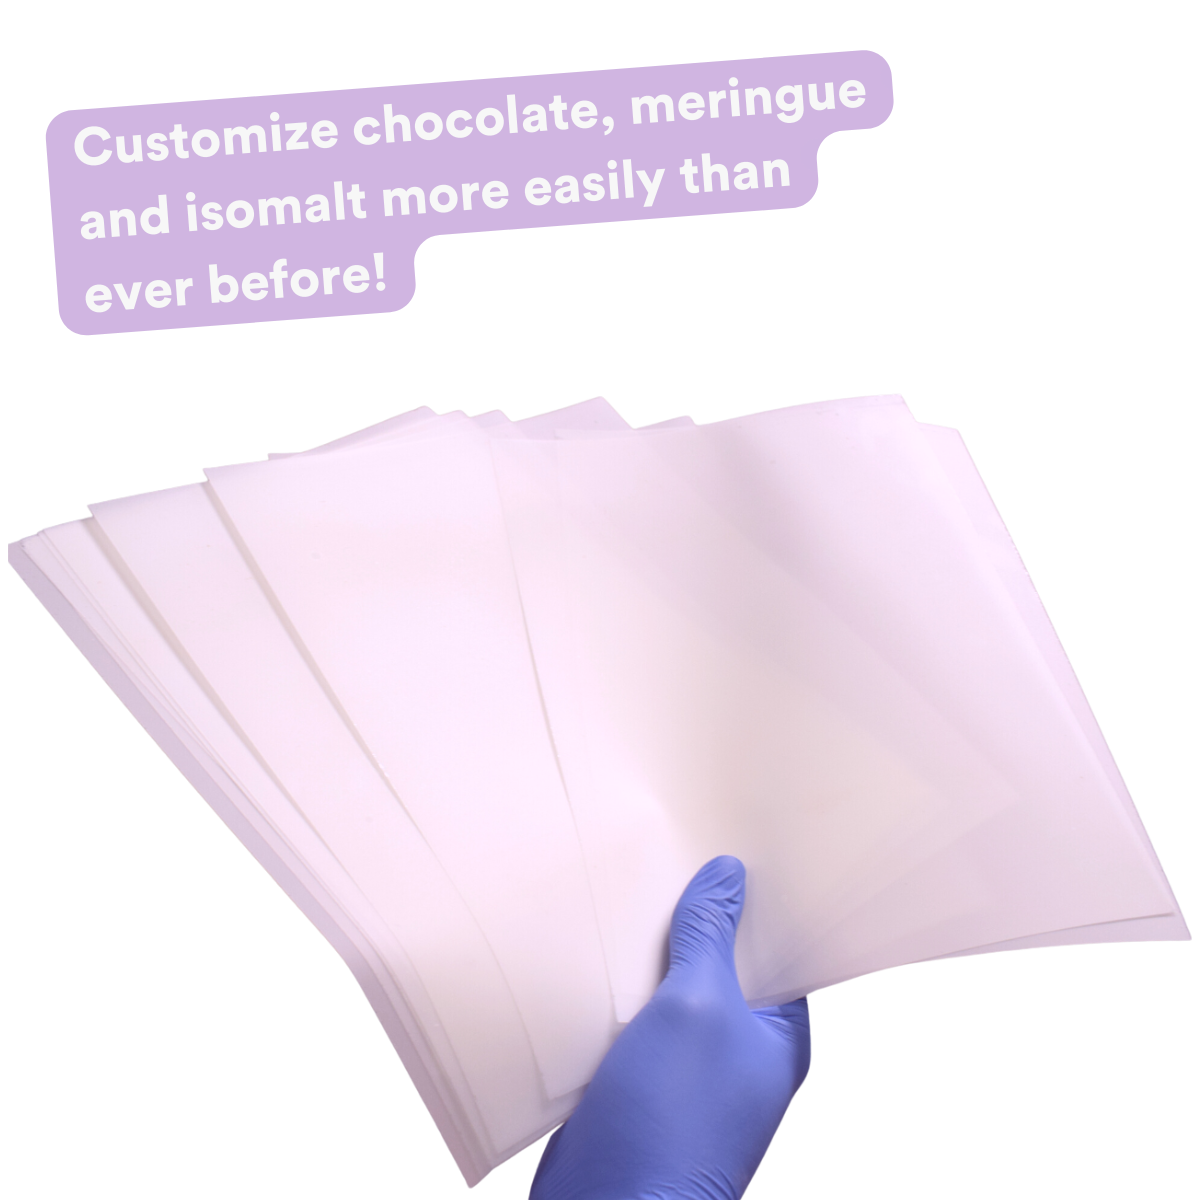 Edible Images & Chocolate Transfer Sheets